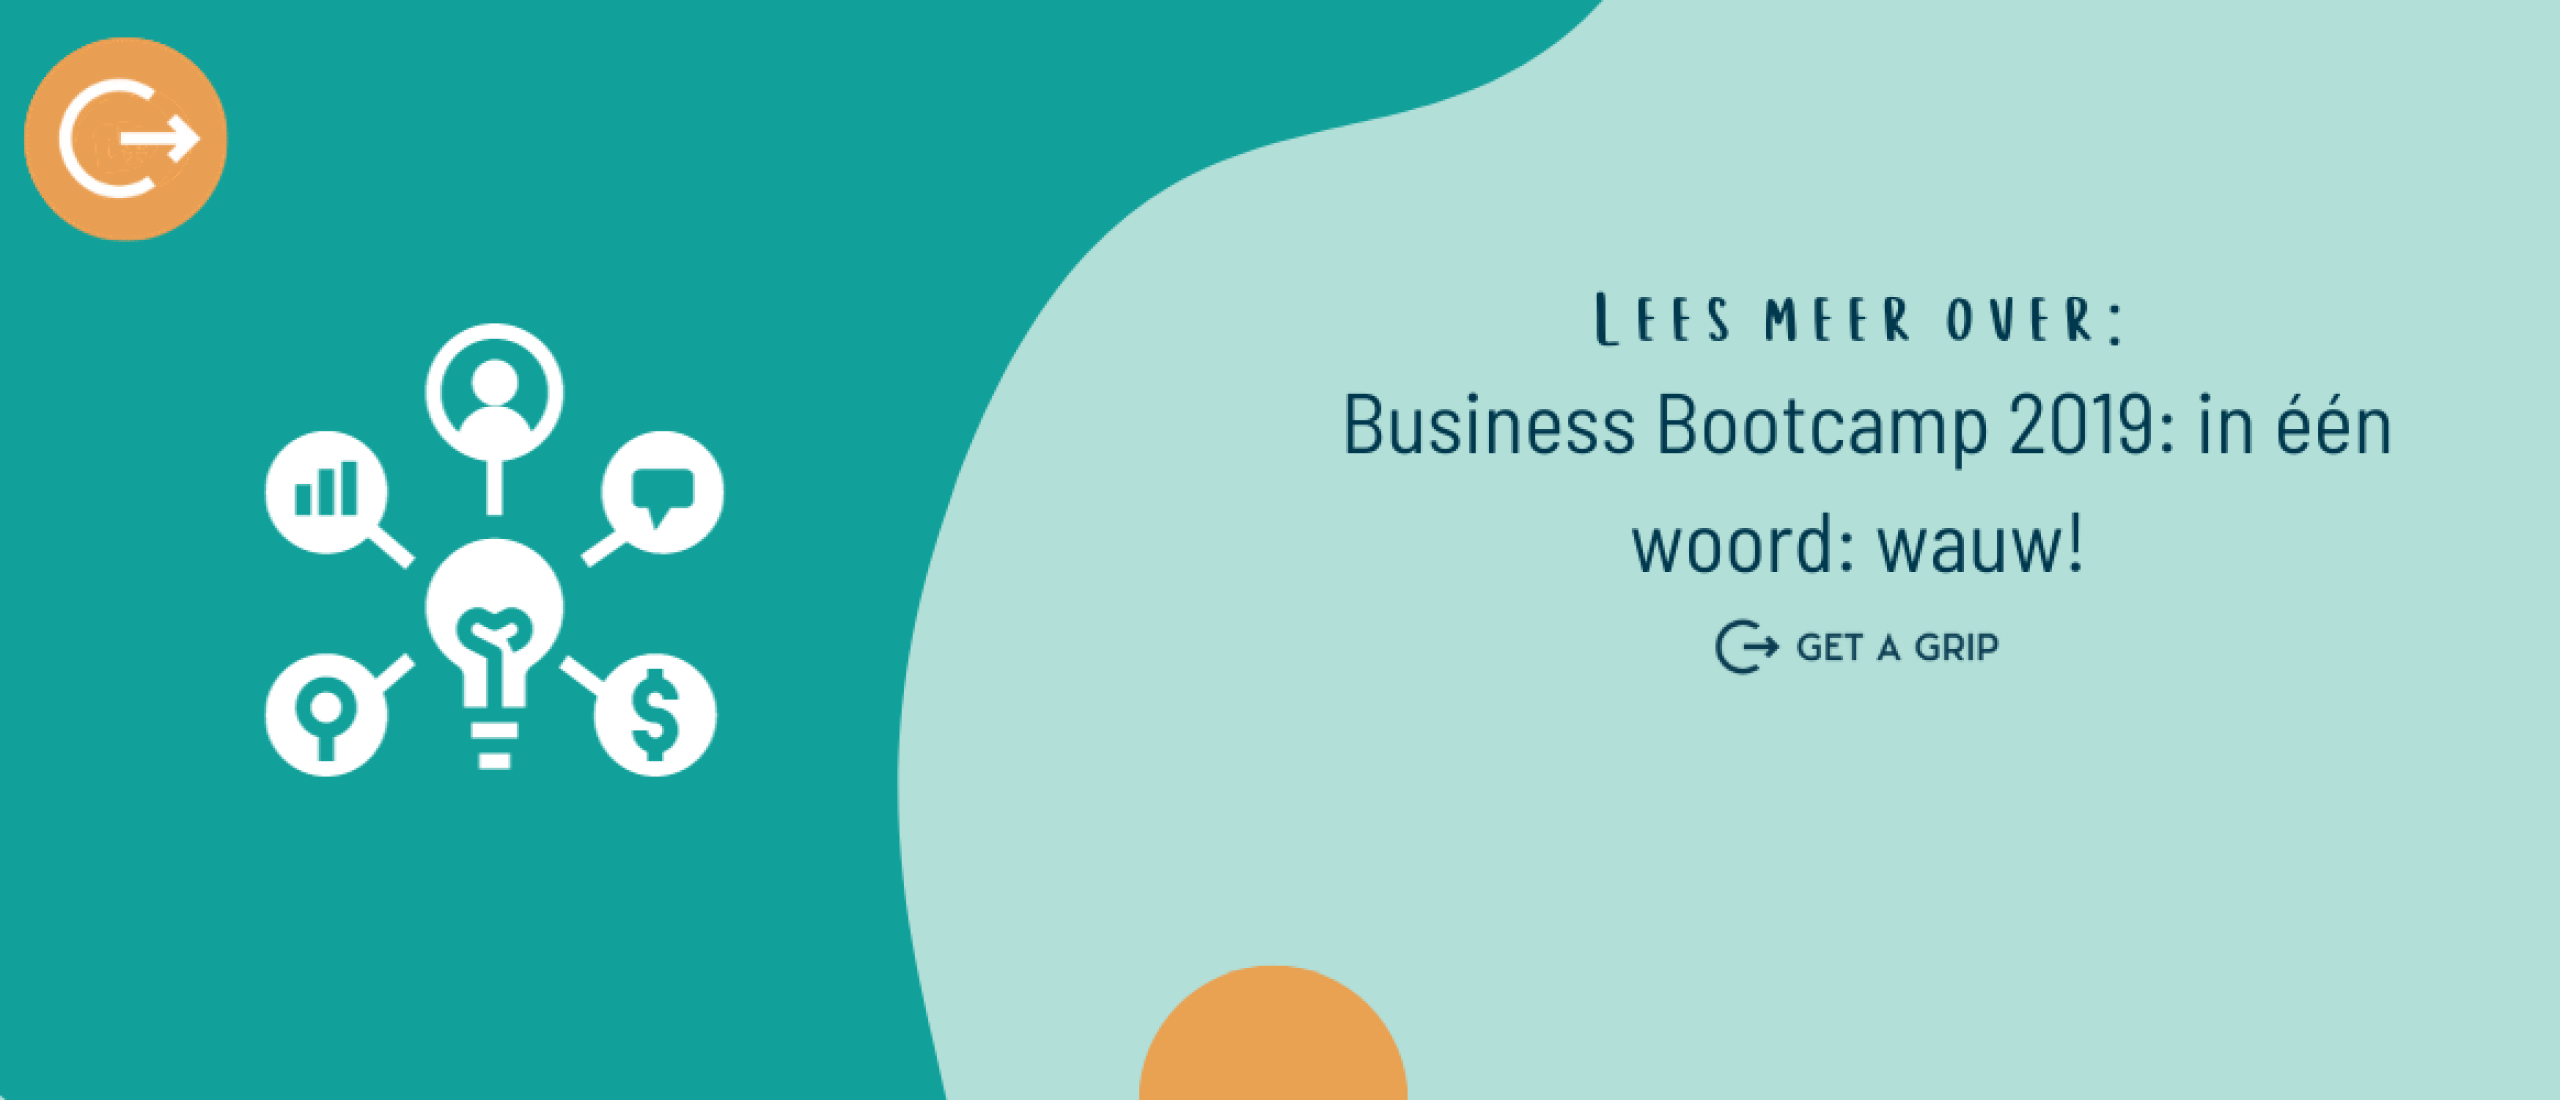 Business Bootcamp 2019 - in één woord: wauw!